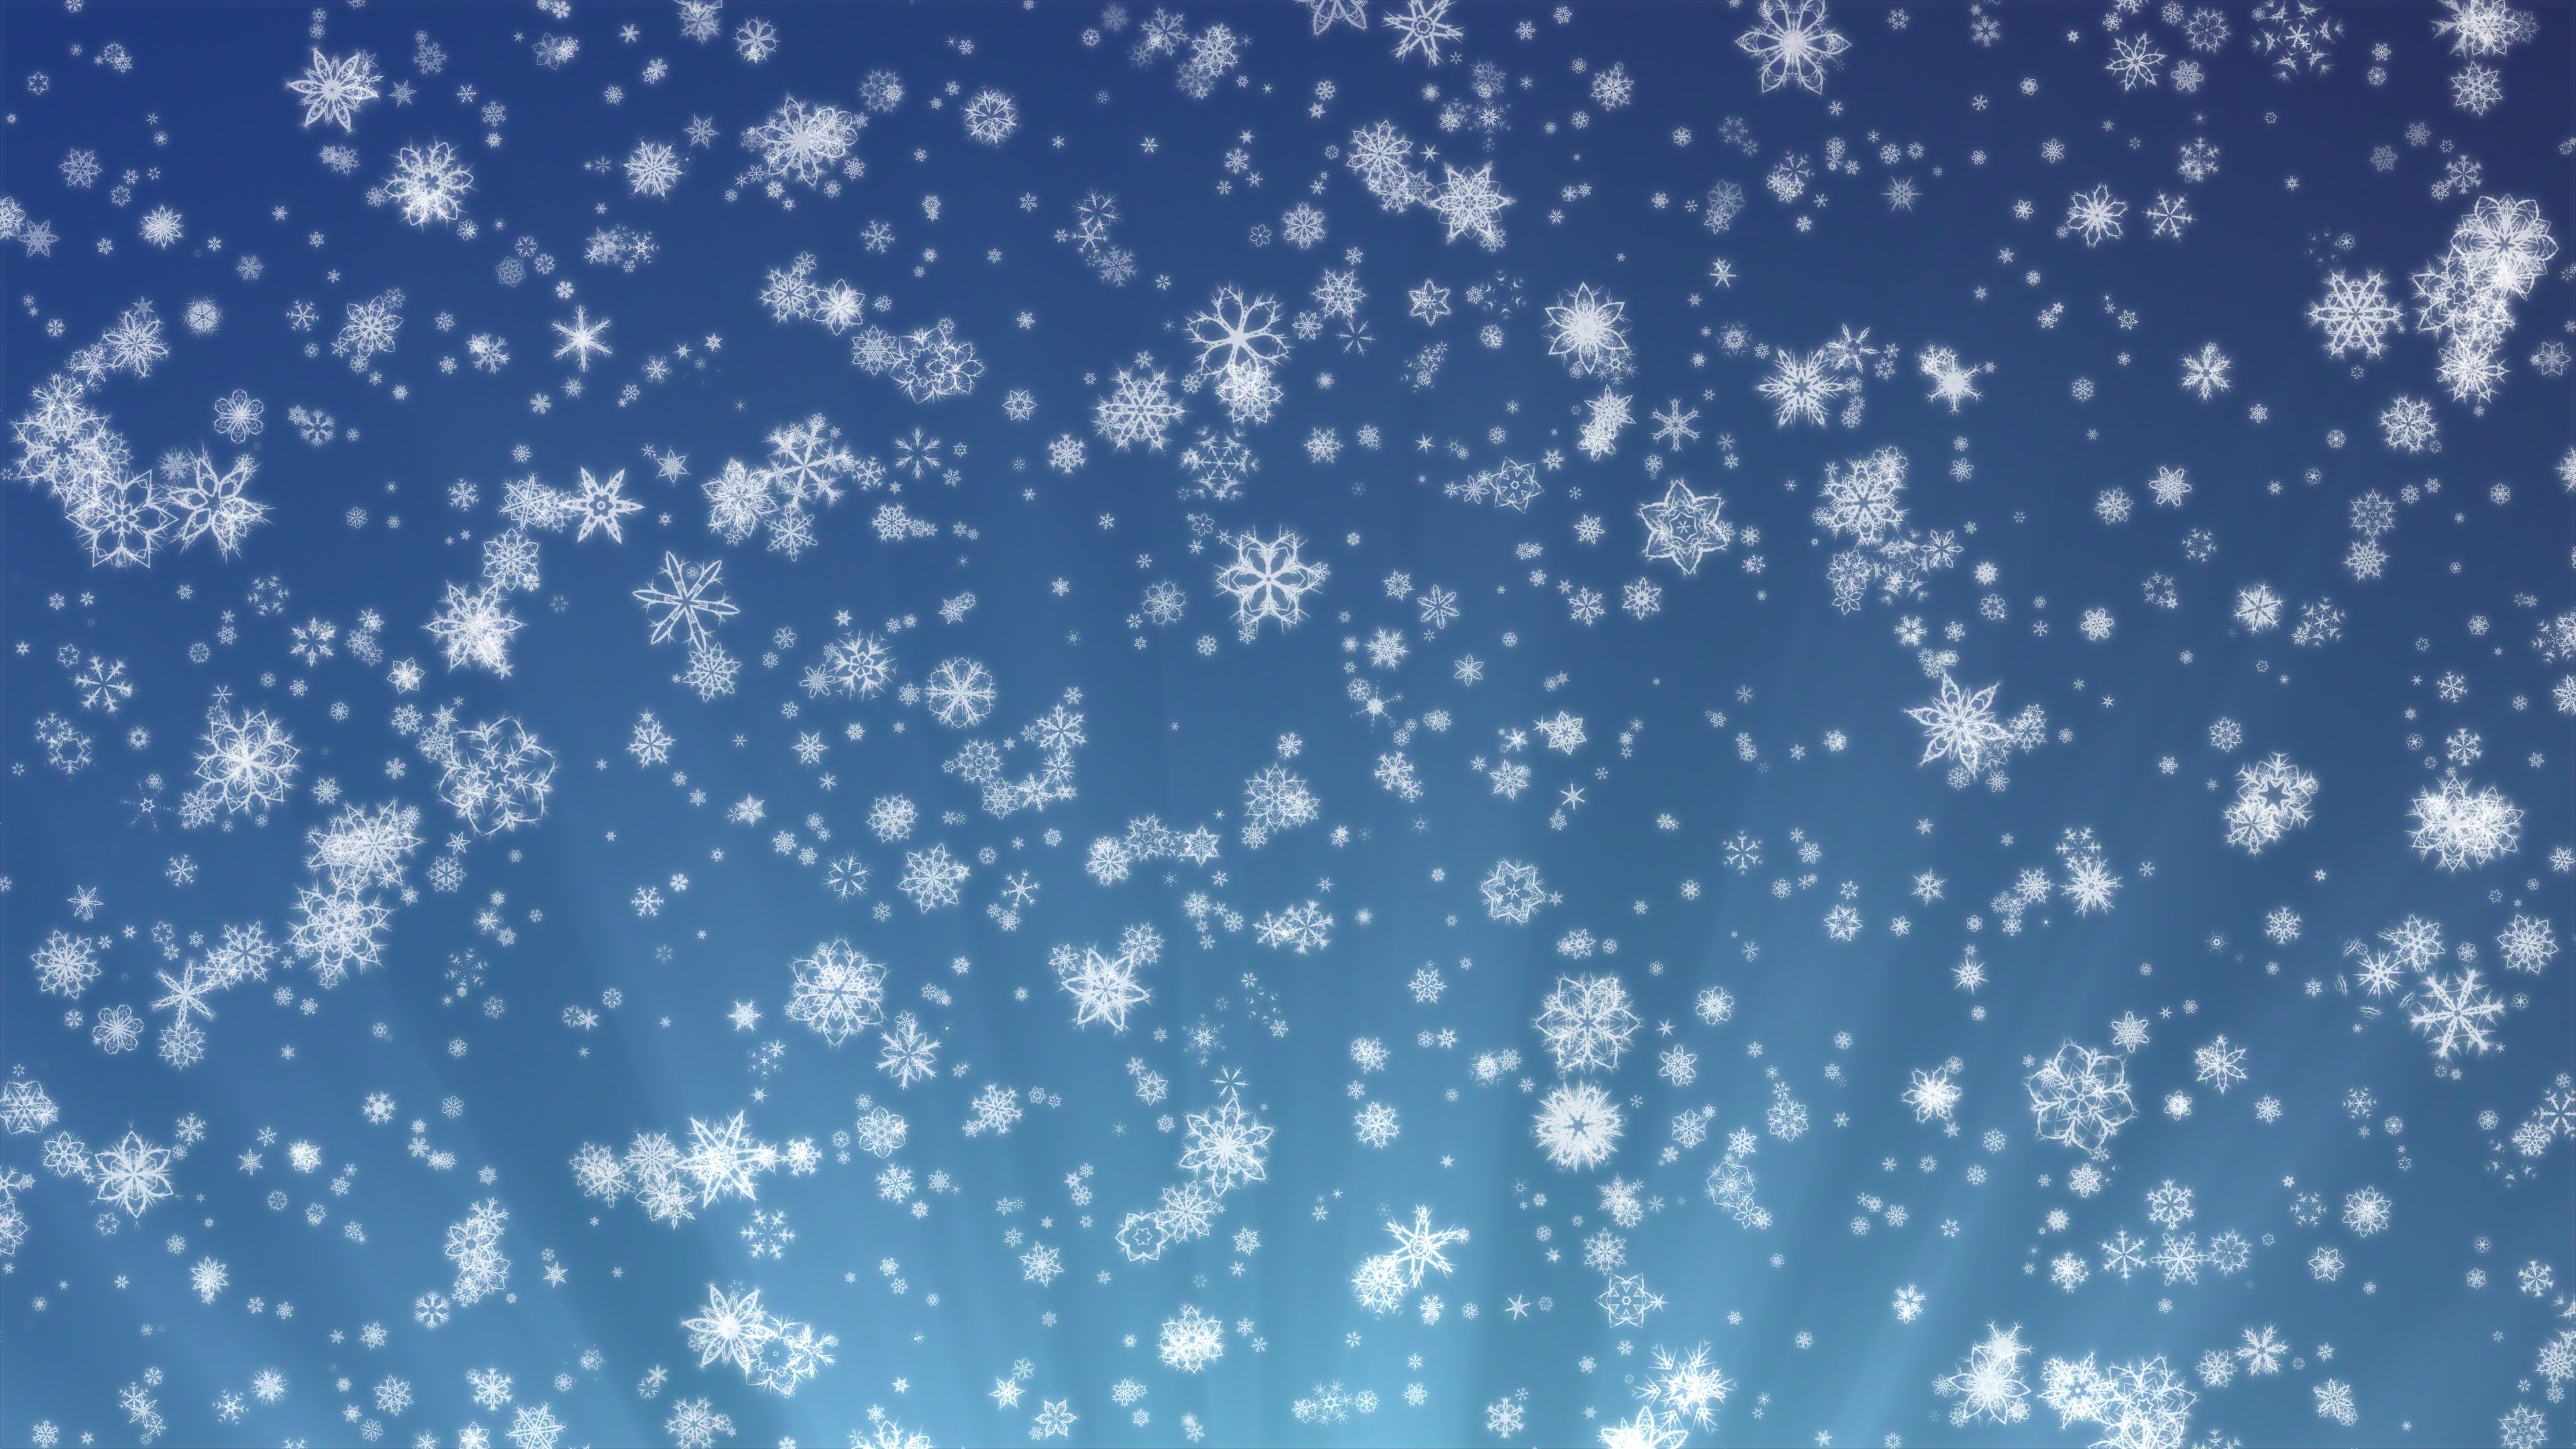 3840x2160 'Pretty Snow' - Snowflakes And Christmas Motion Background Loop-Sample3